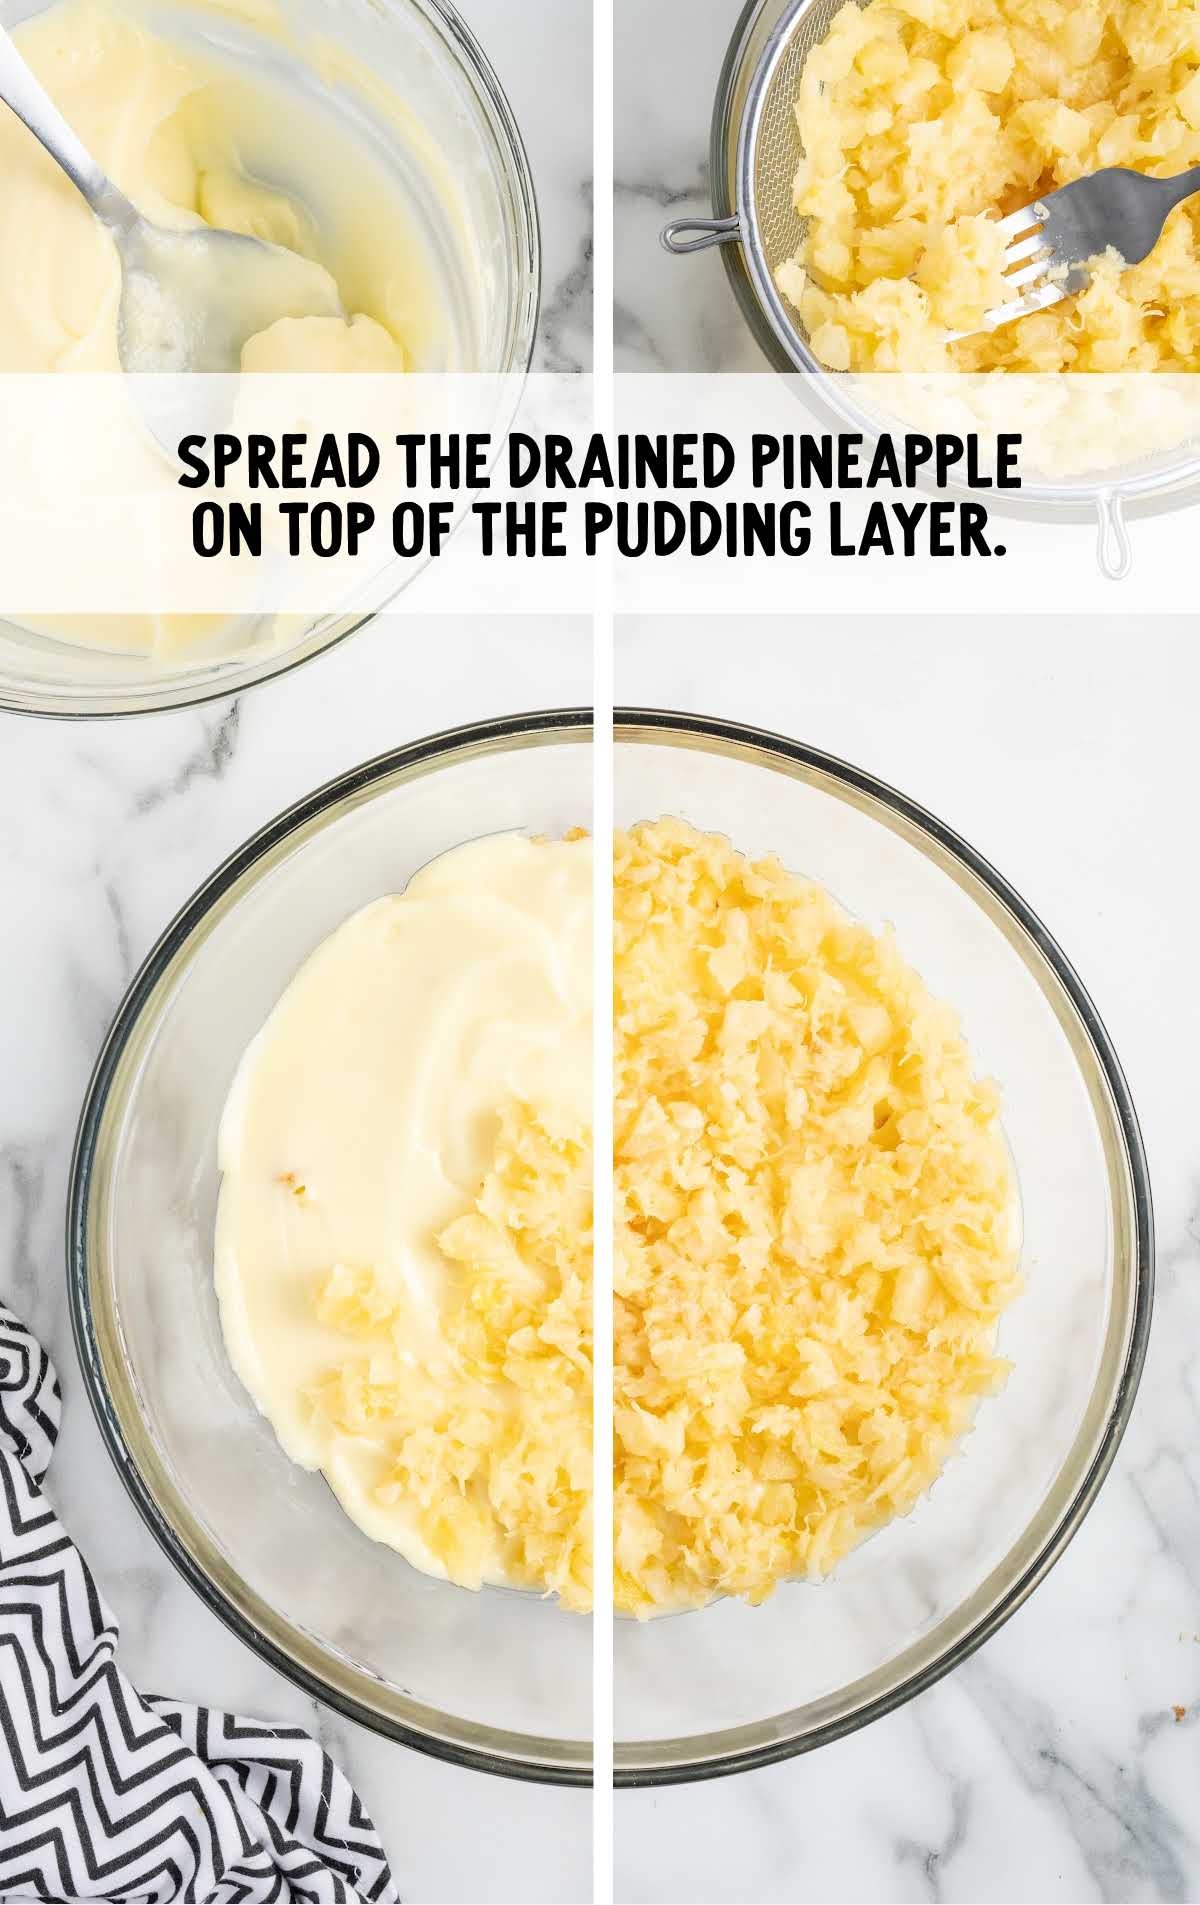 pineapples spread on top of the pudding layer